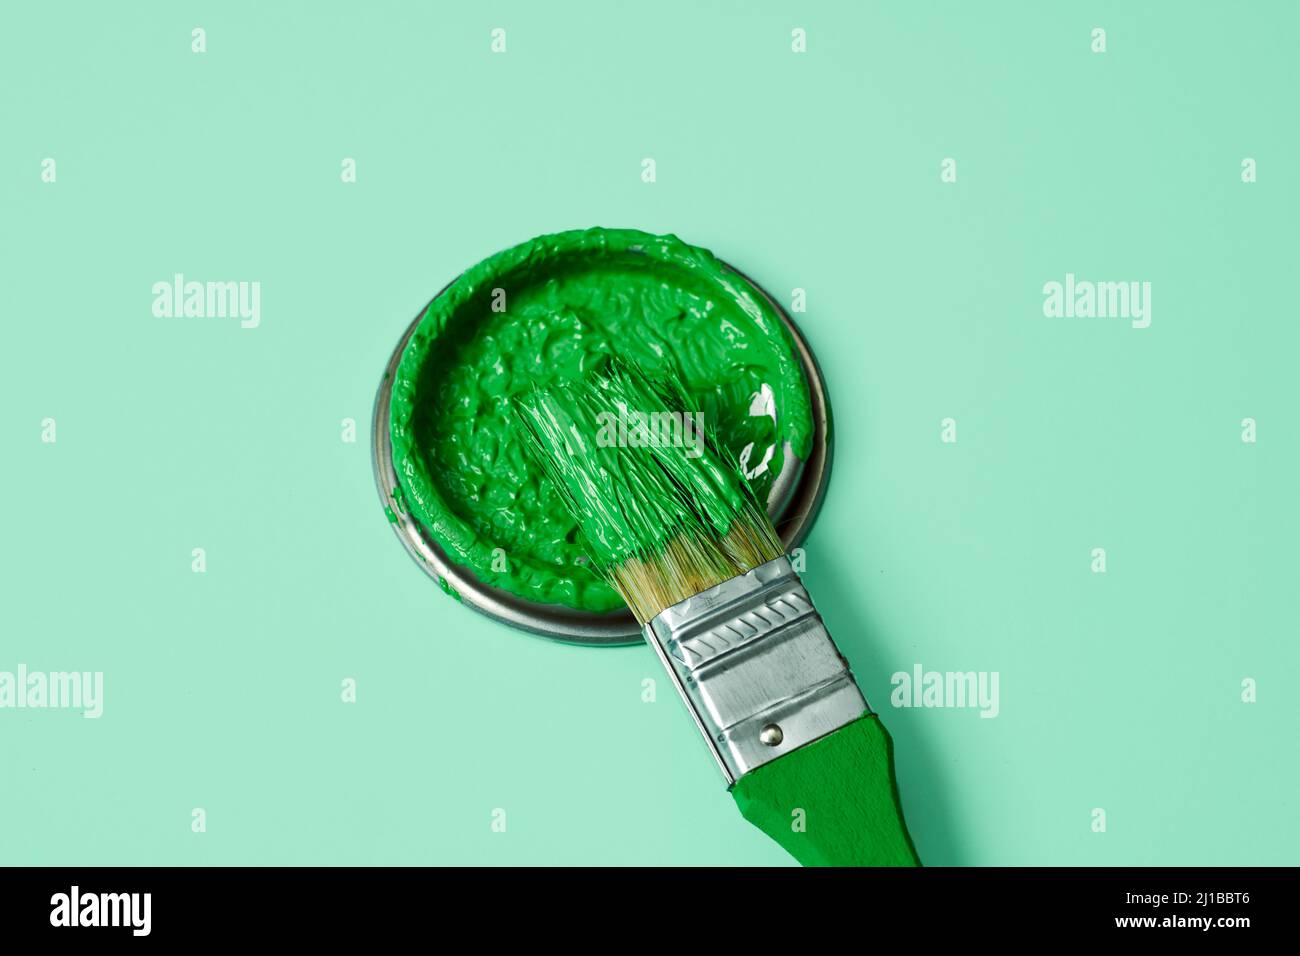 closeup of a paintbrush and the lid of a paint can with green pain, on a pale green background Stock Photo